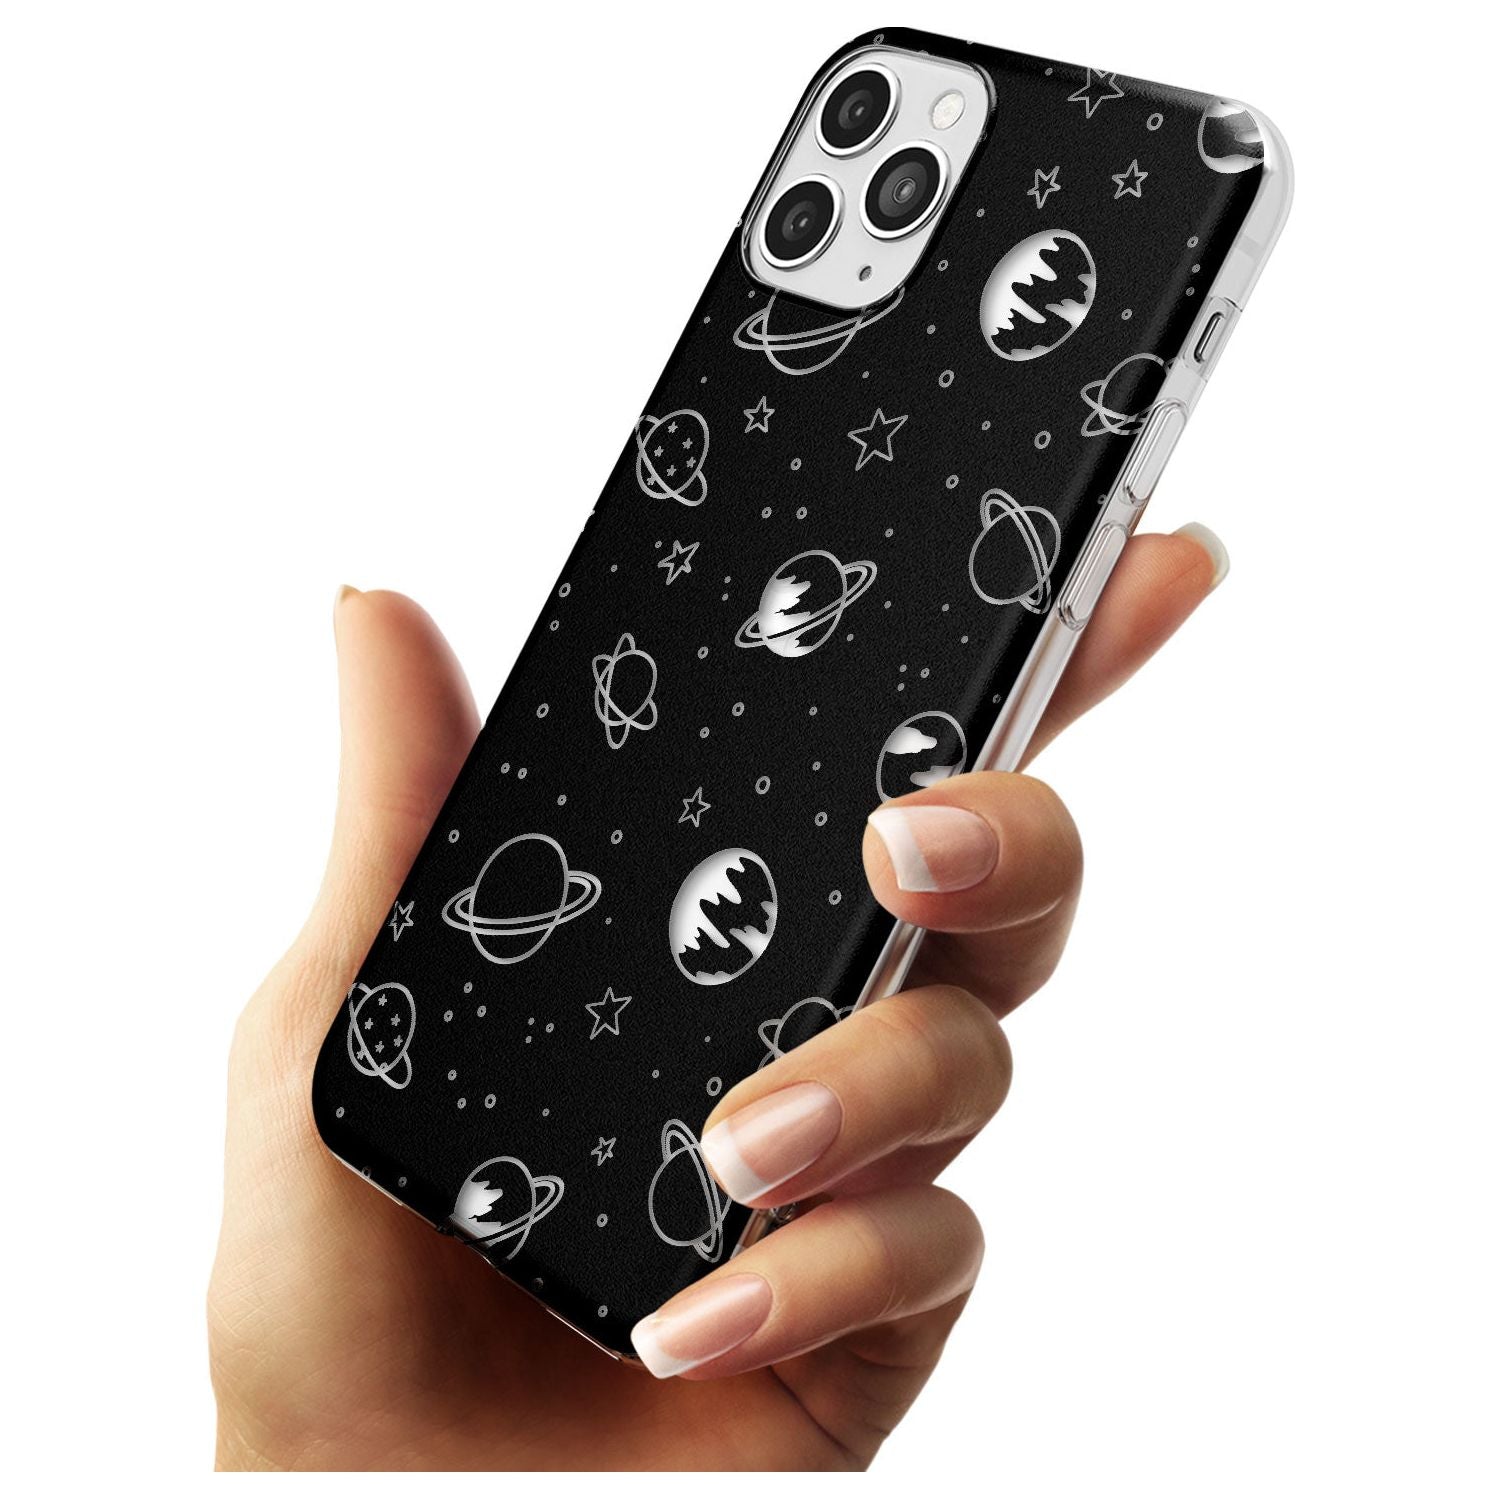 Outer Space Outlines: Clear on Black Black Impact Phone Case for iPhone 11 Pro Max